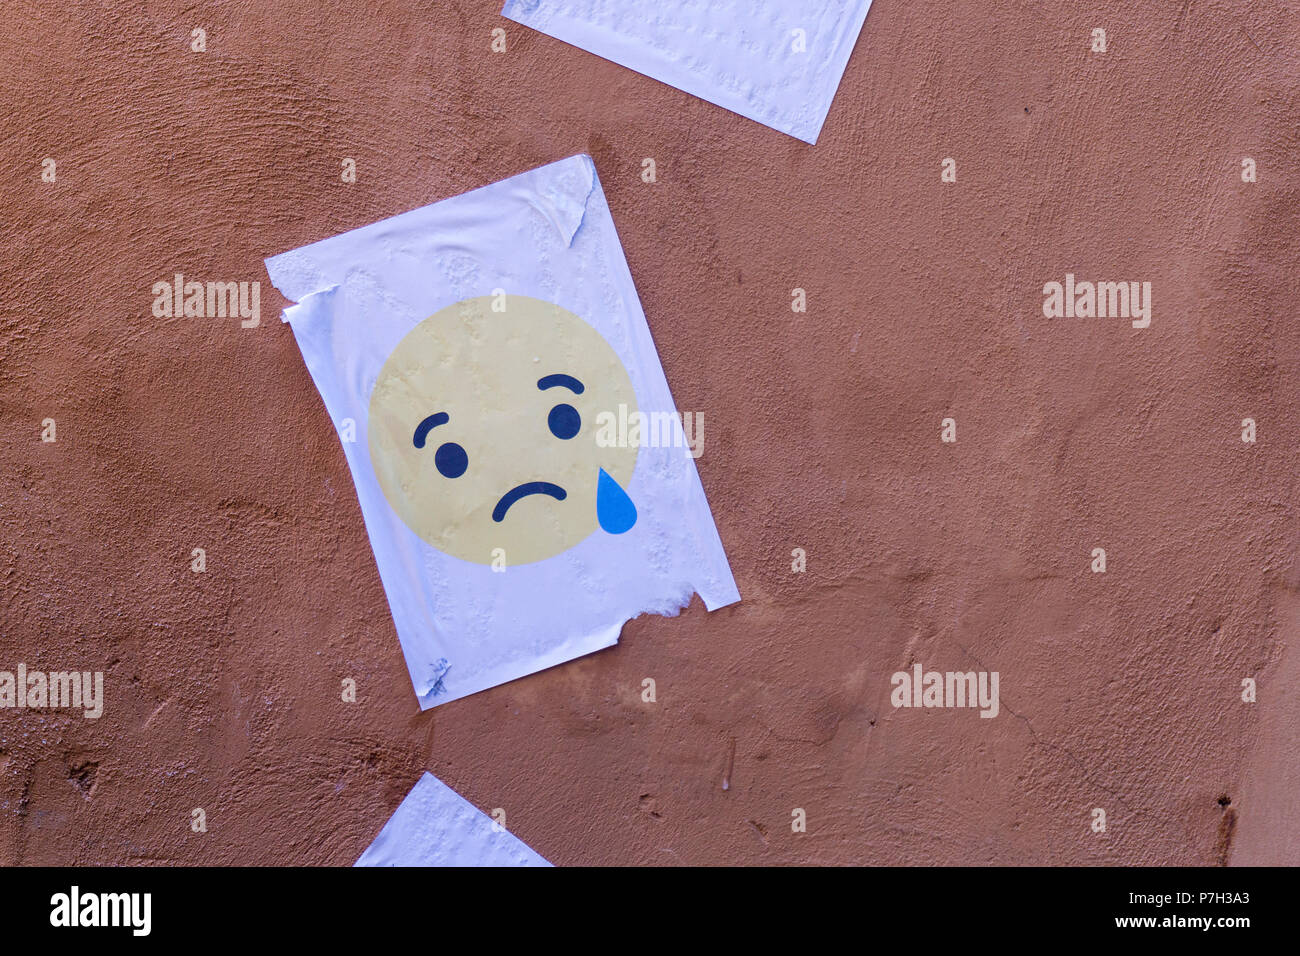 Crying emoji character printed onto paper and stuck on a wall Stock Photo